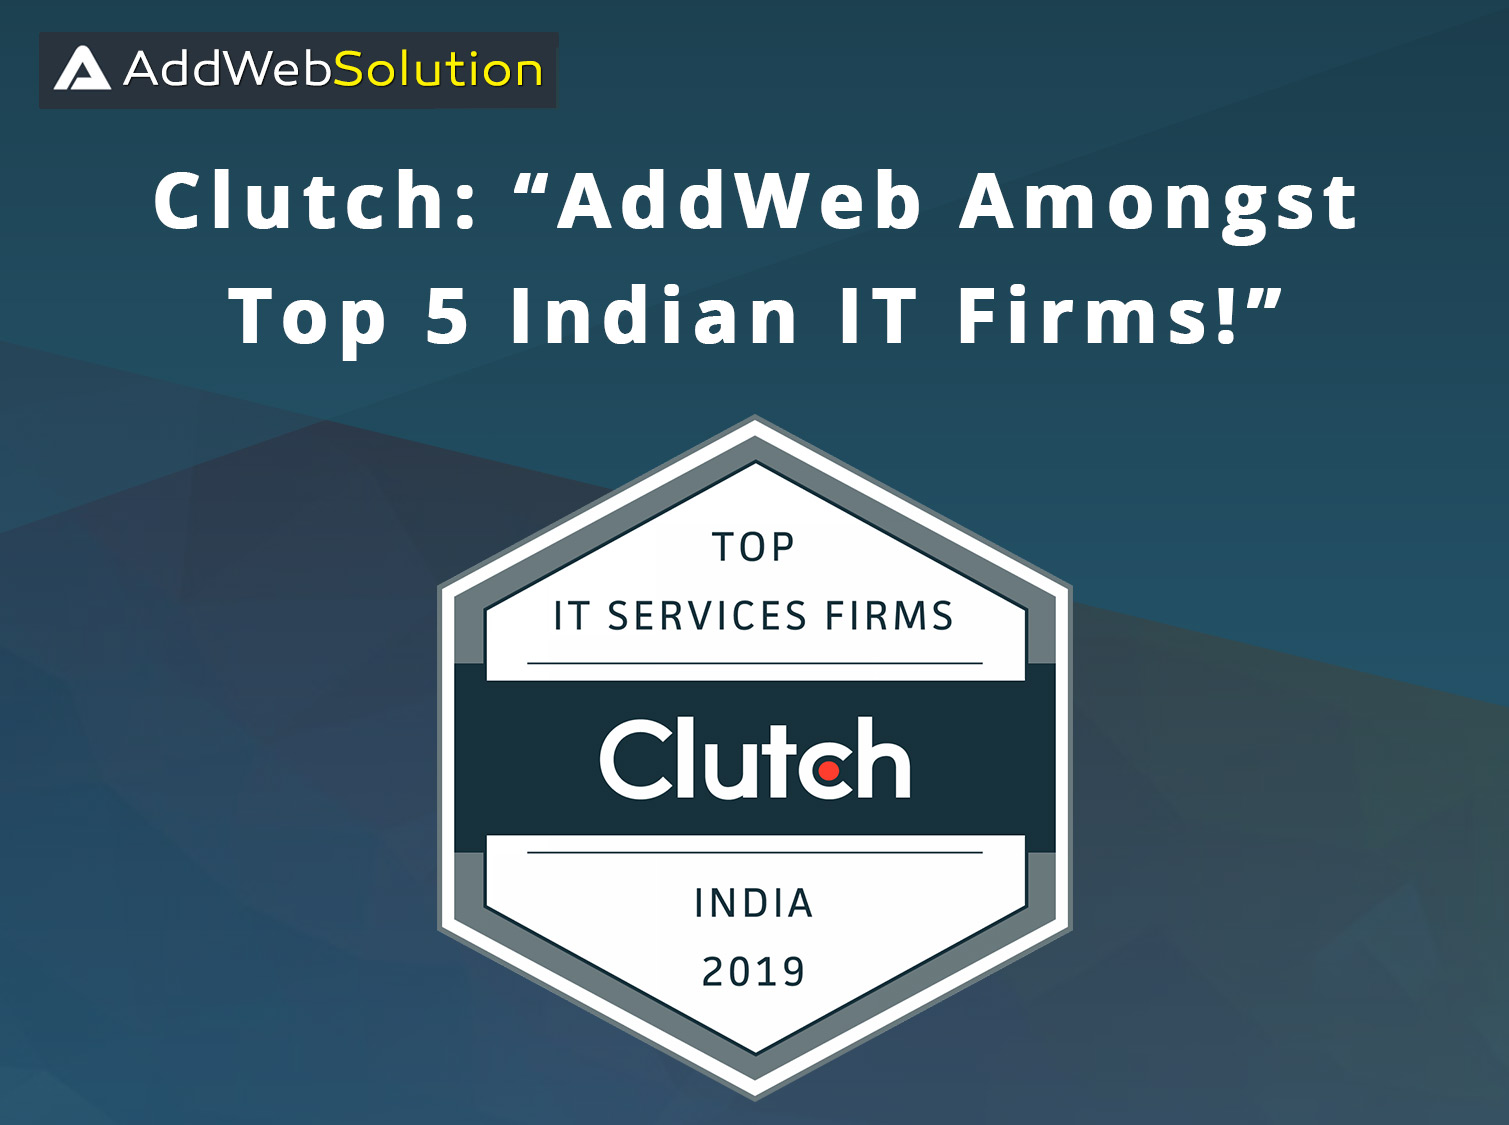 Top 5 Indian IT Firms 2019 by Clutch